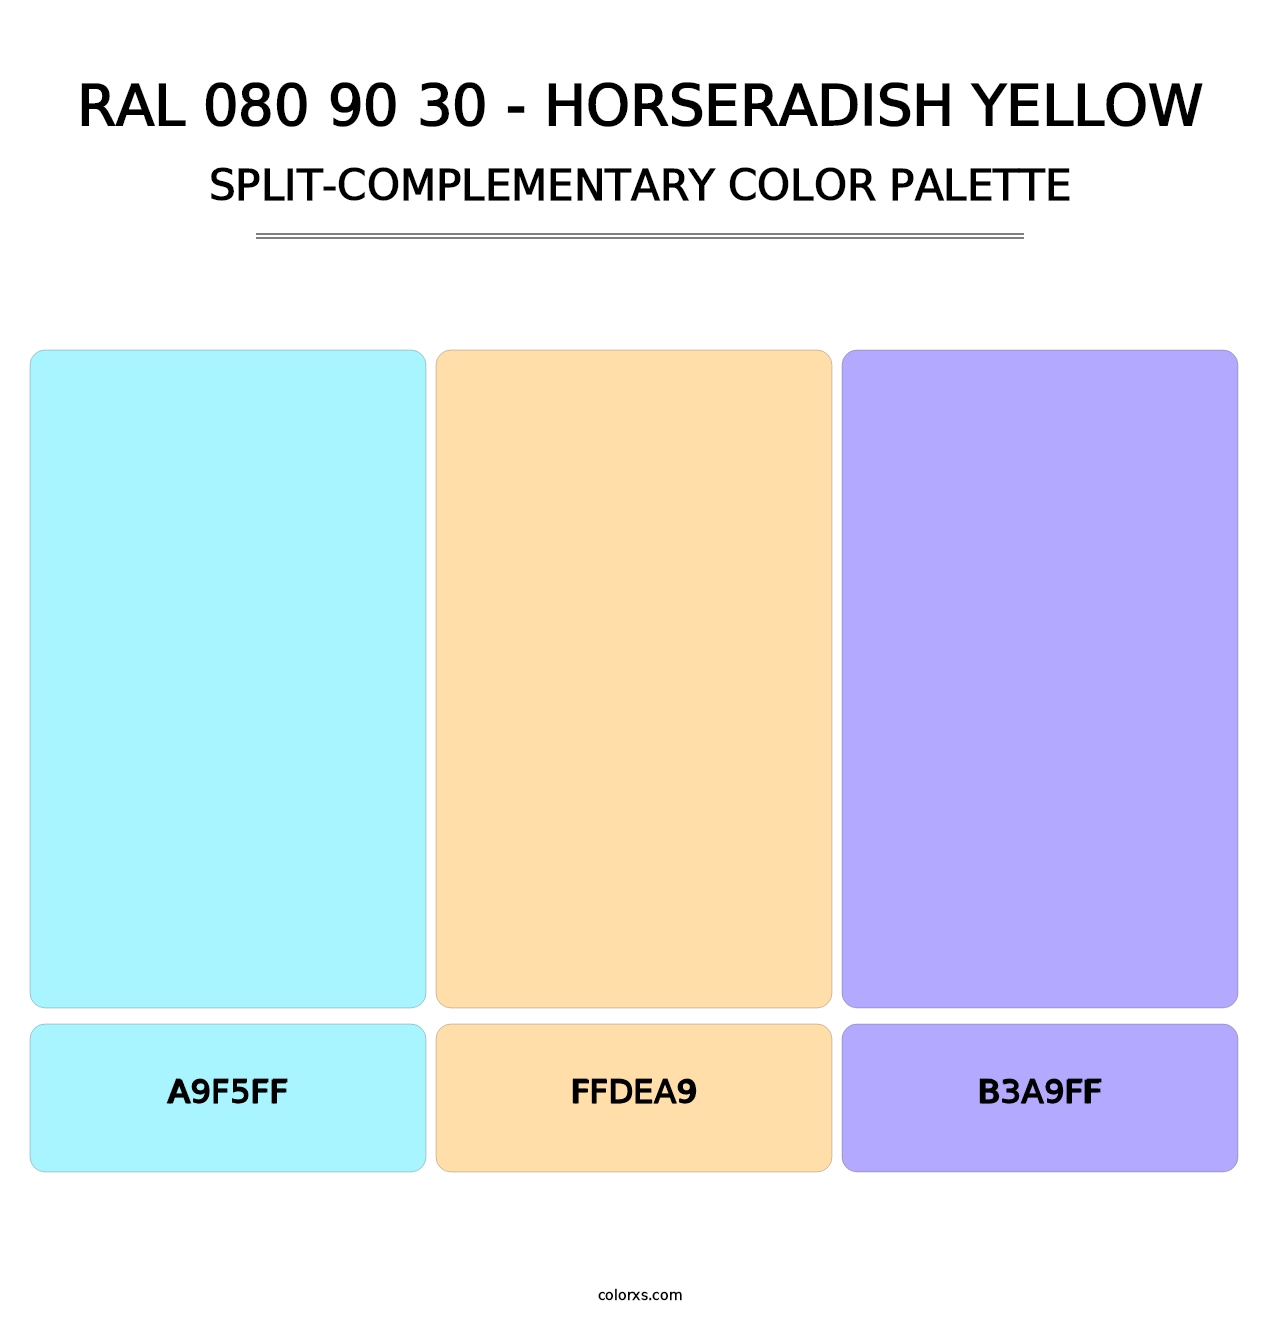 RAL 080 90 30 - Horseradish Yellow - Split-Complementary Color Palette